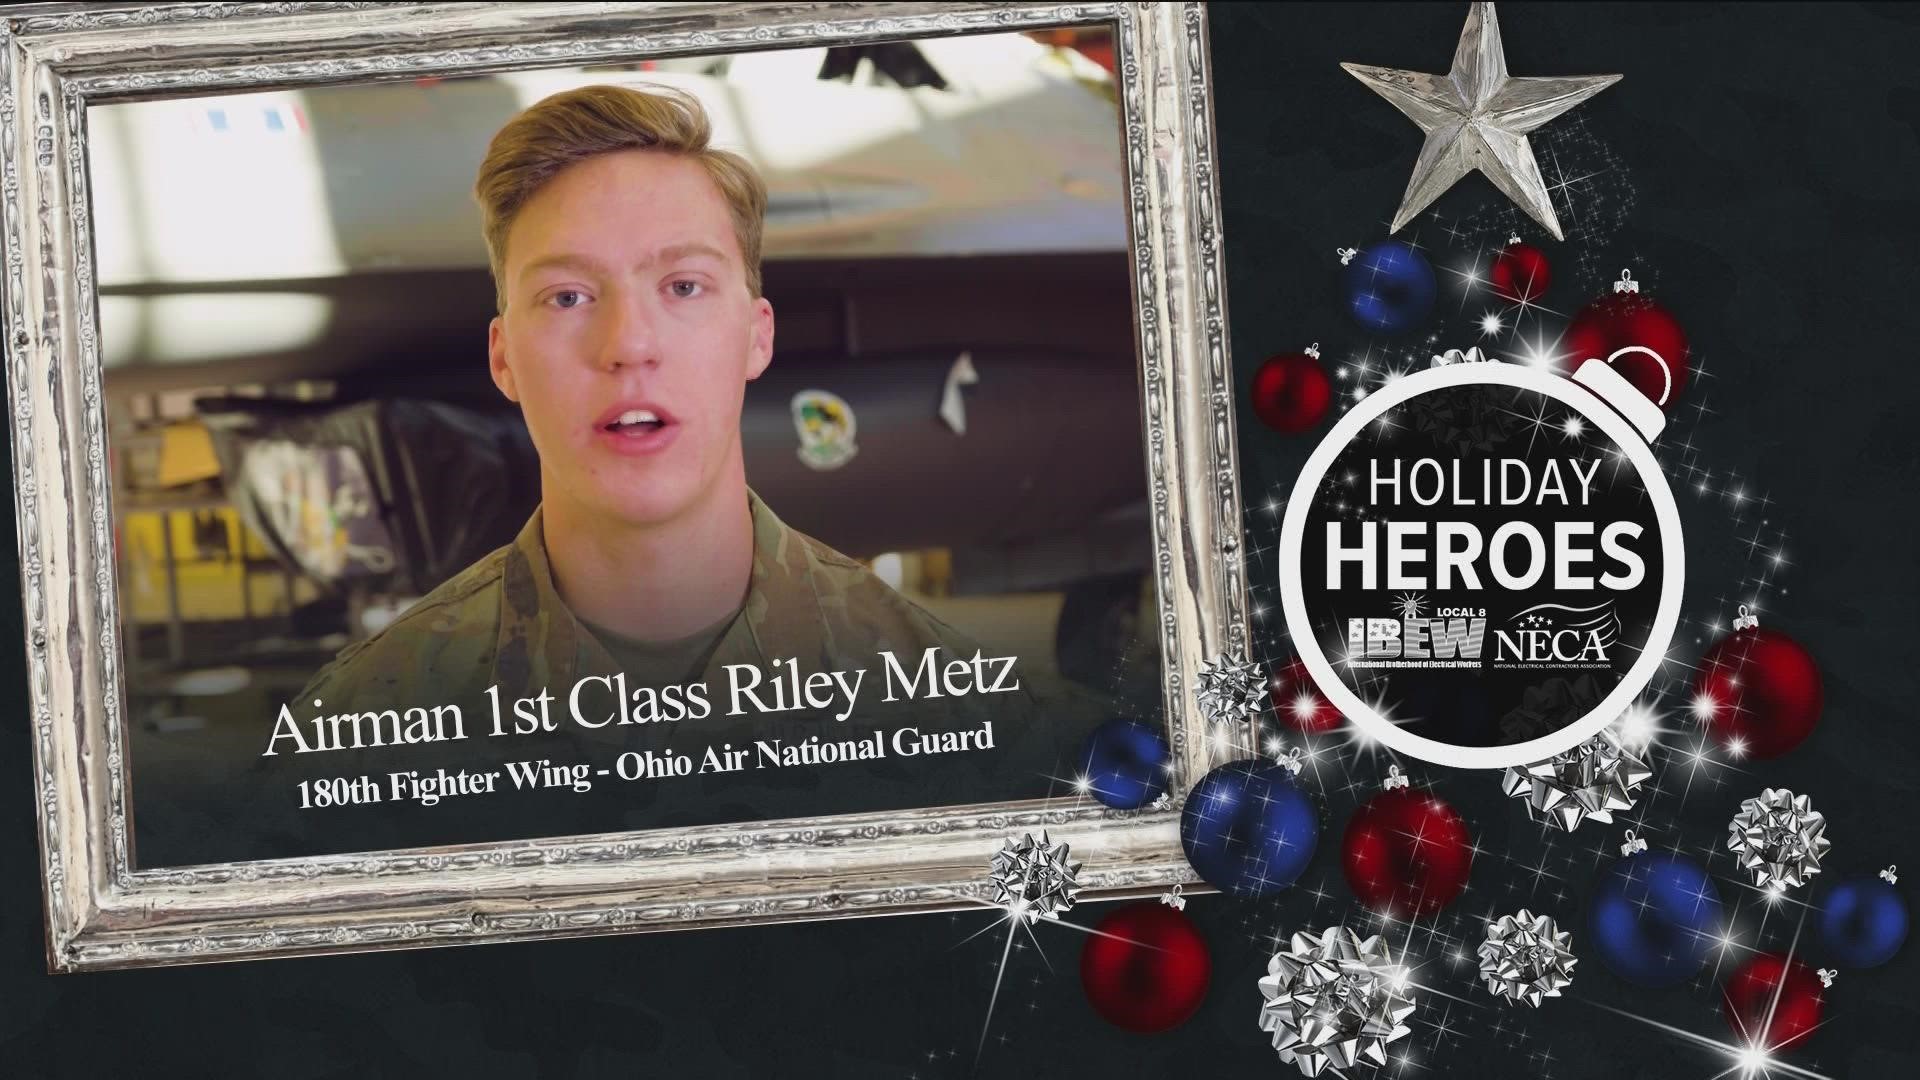 Airman 1st Class Riley Metz of the Ohio Air National Guard 180th Fighter Wing wishes his family a Merry Christmas.